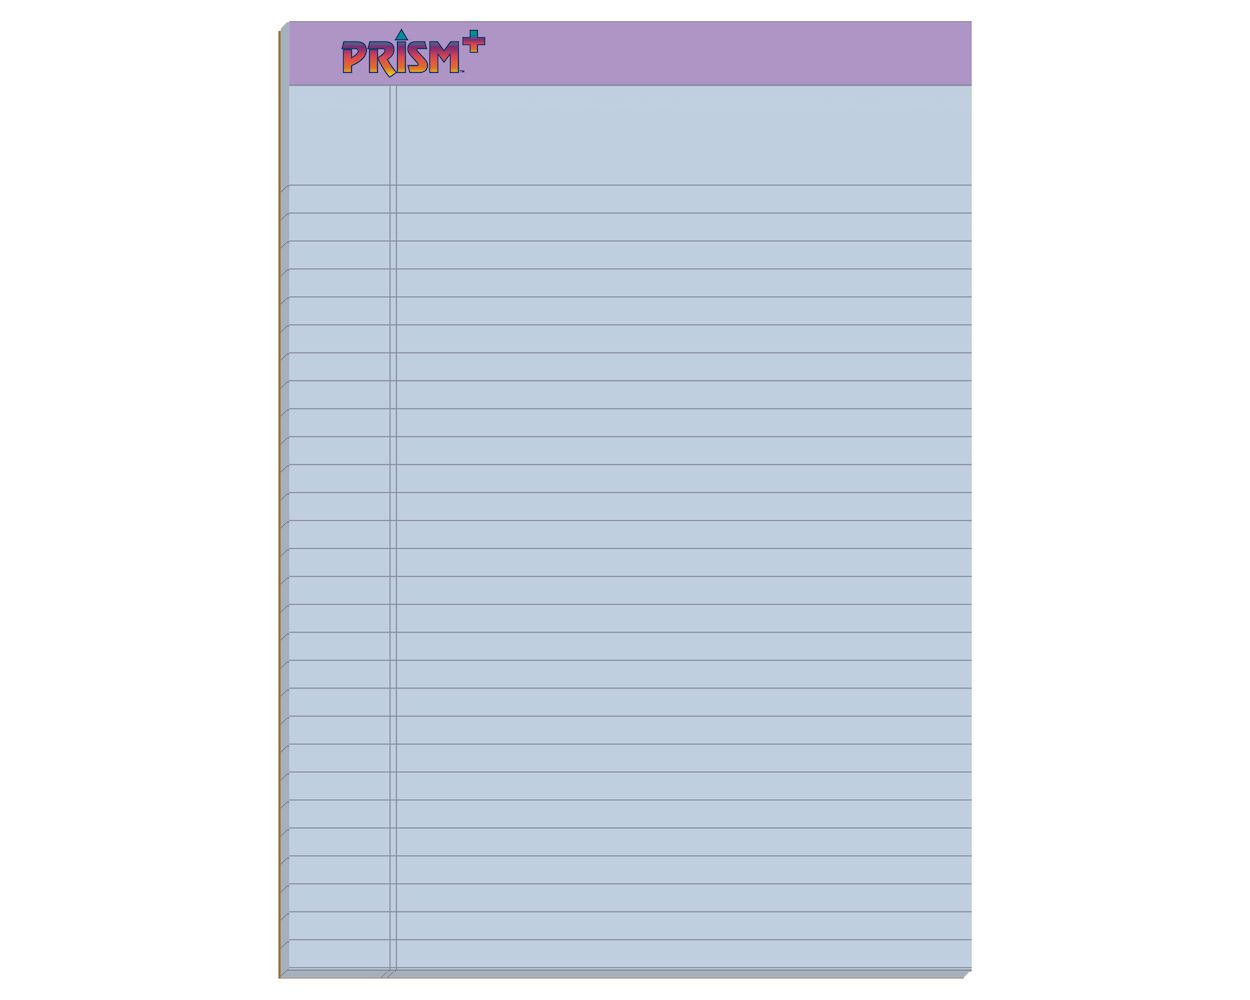 TOPS Prism+ Legal Pad, 8-1/2" x 11-3/4", Perforated, Orchid, Legal/Wide  Rule, 50 SH/PD, 12 PD/PK